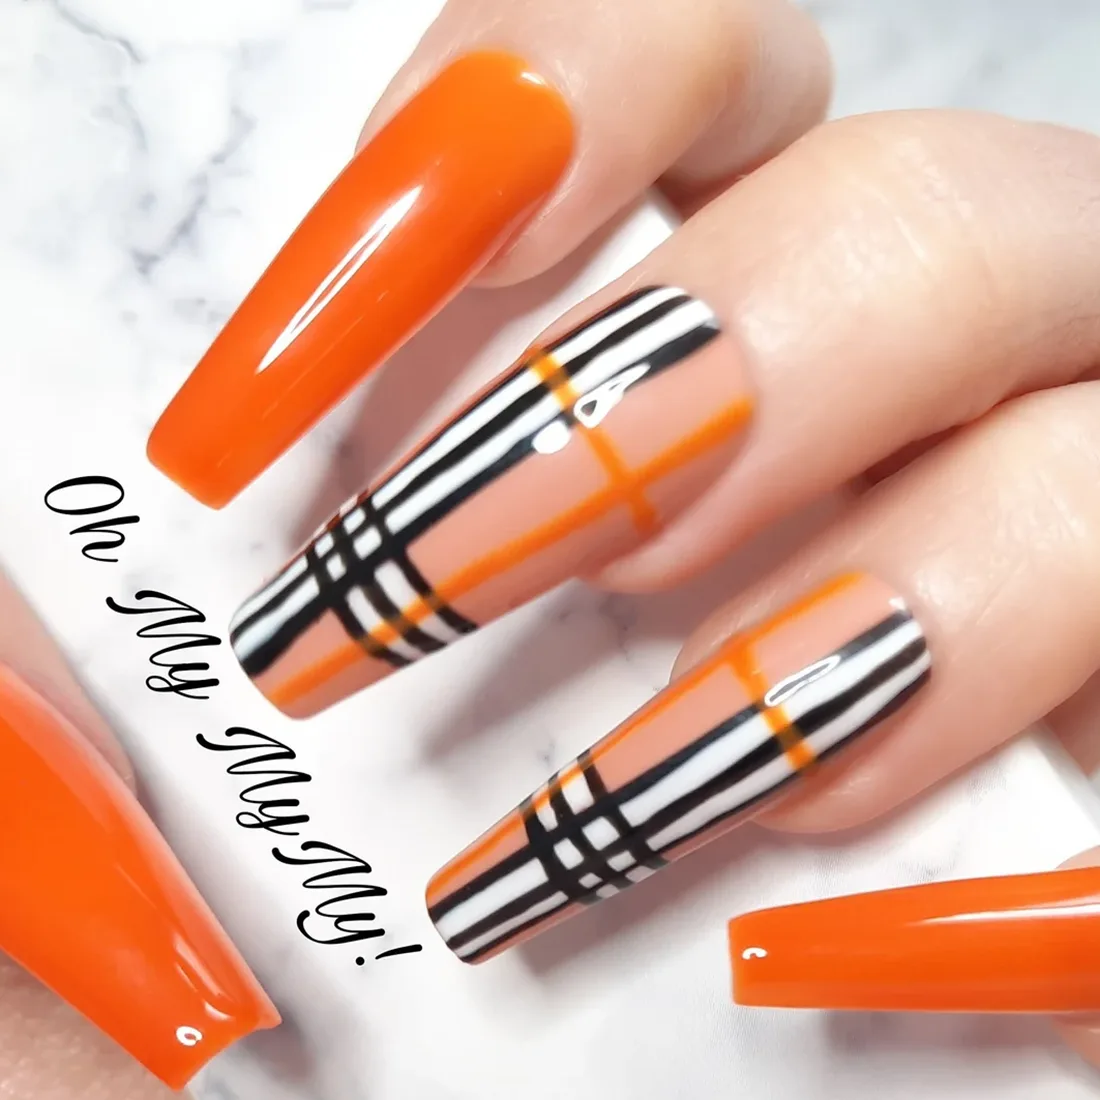 Long orange and plaid nails for fall | Trendy Fall Nail Designs You Can Buy as Press-Ons on Etsy | Slashed Beauty